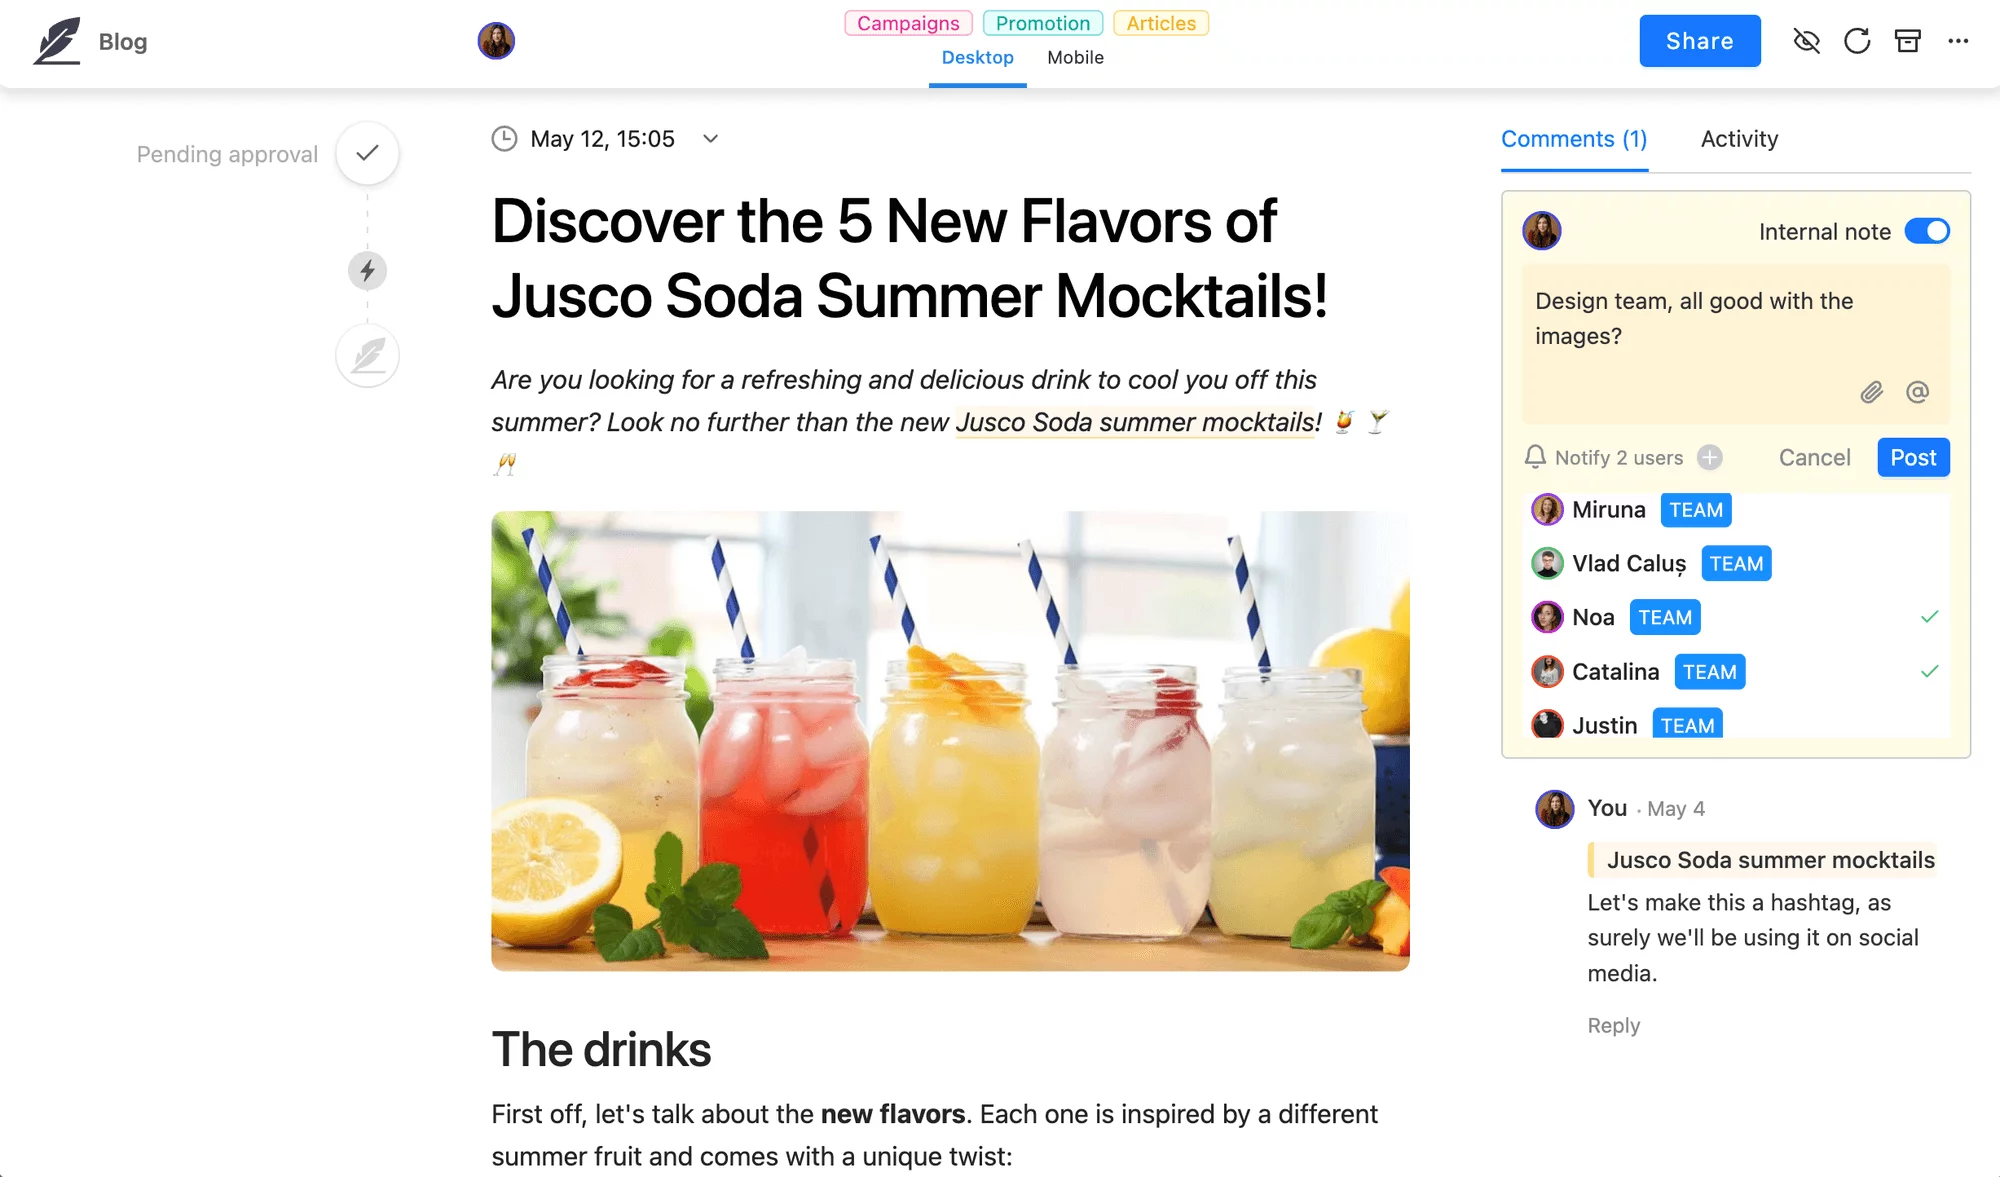 Blog post draft featuring a title about new Jusco Soda Summer Mocktails, with collaboration on the right side via comments, allowing only team members to see the comments